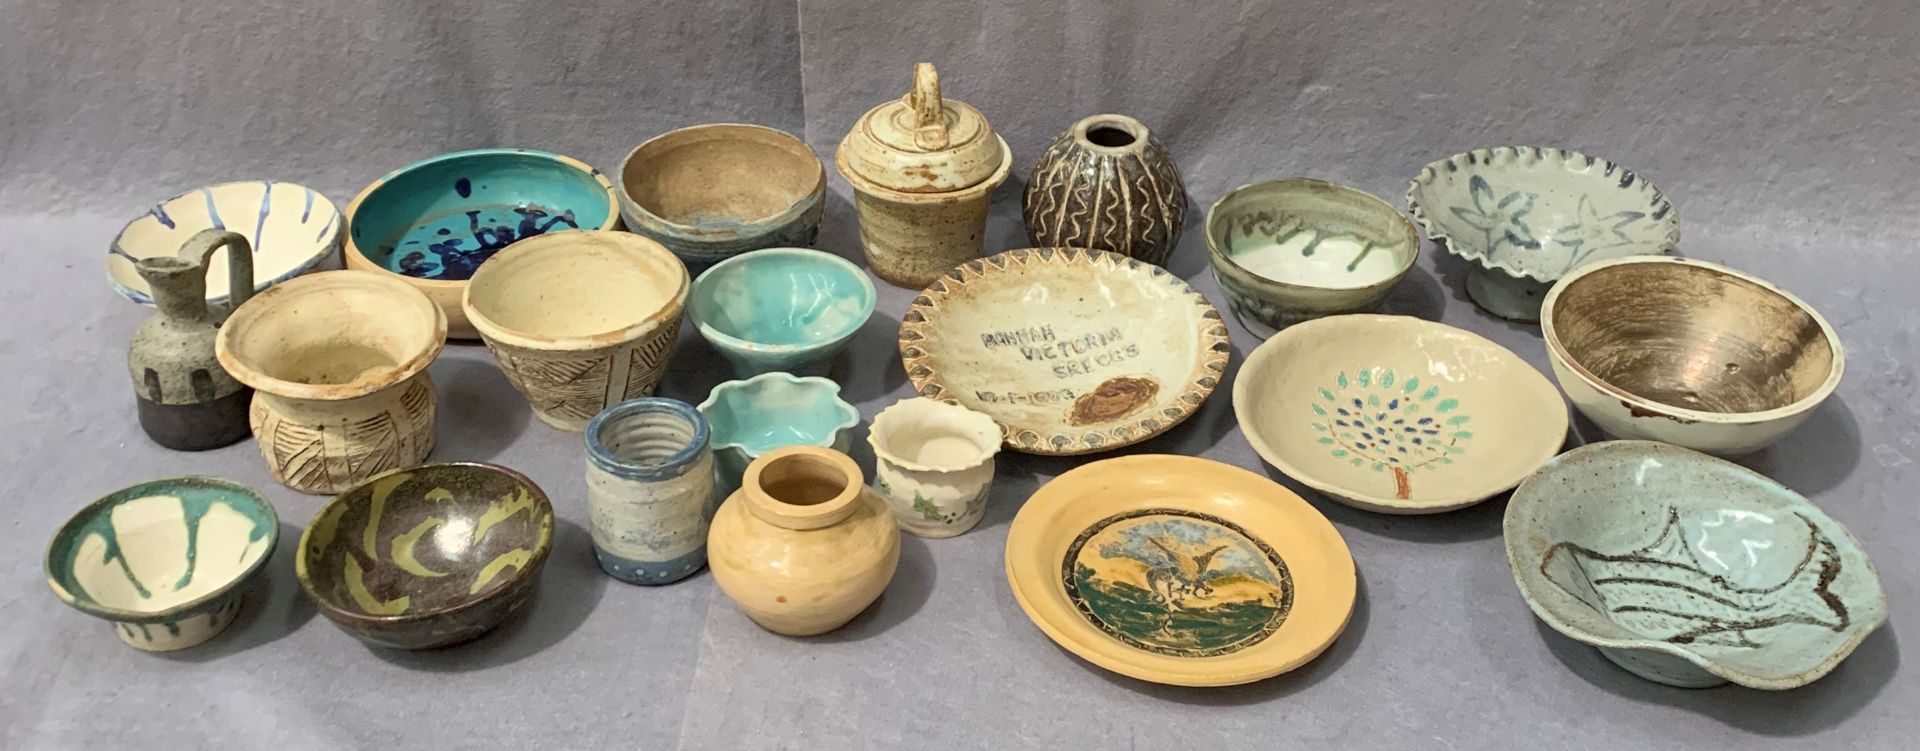 JOAN UNDERHILL - 25 mainly smaller glazed studio pottery plates, dishes, bowls,